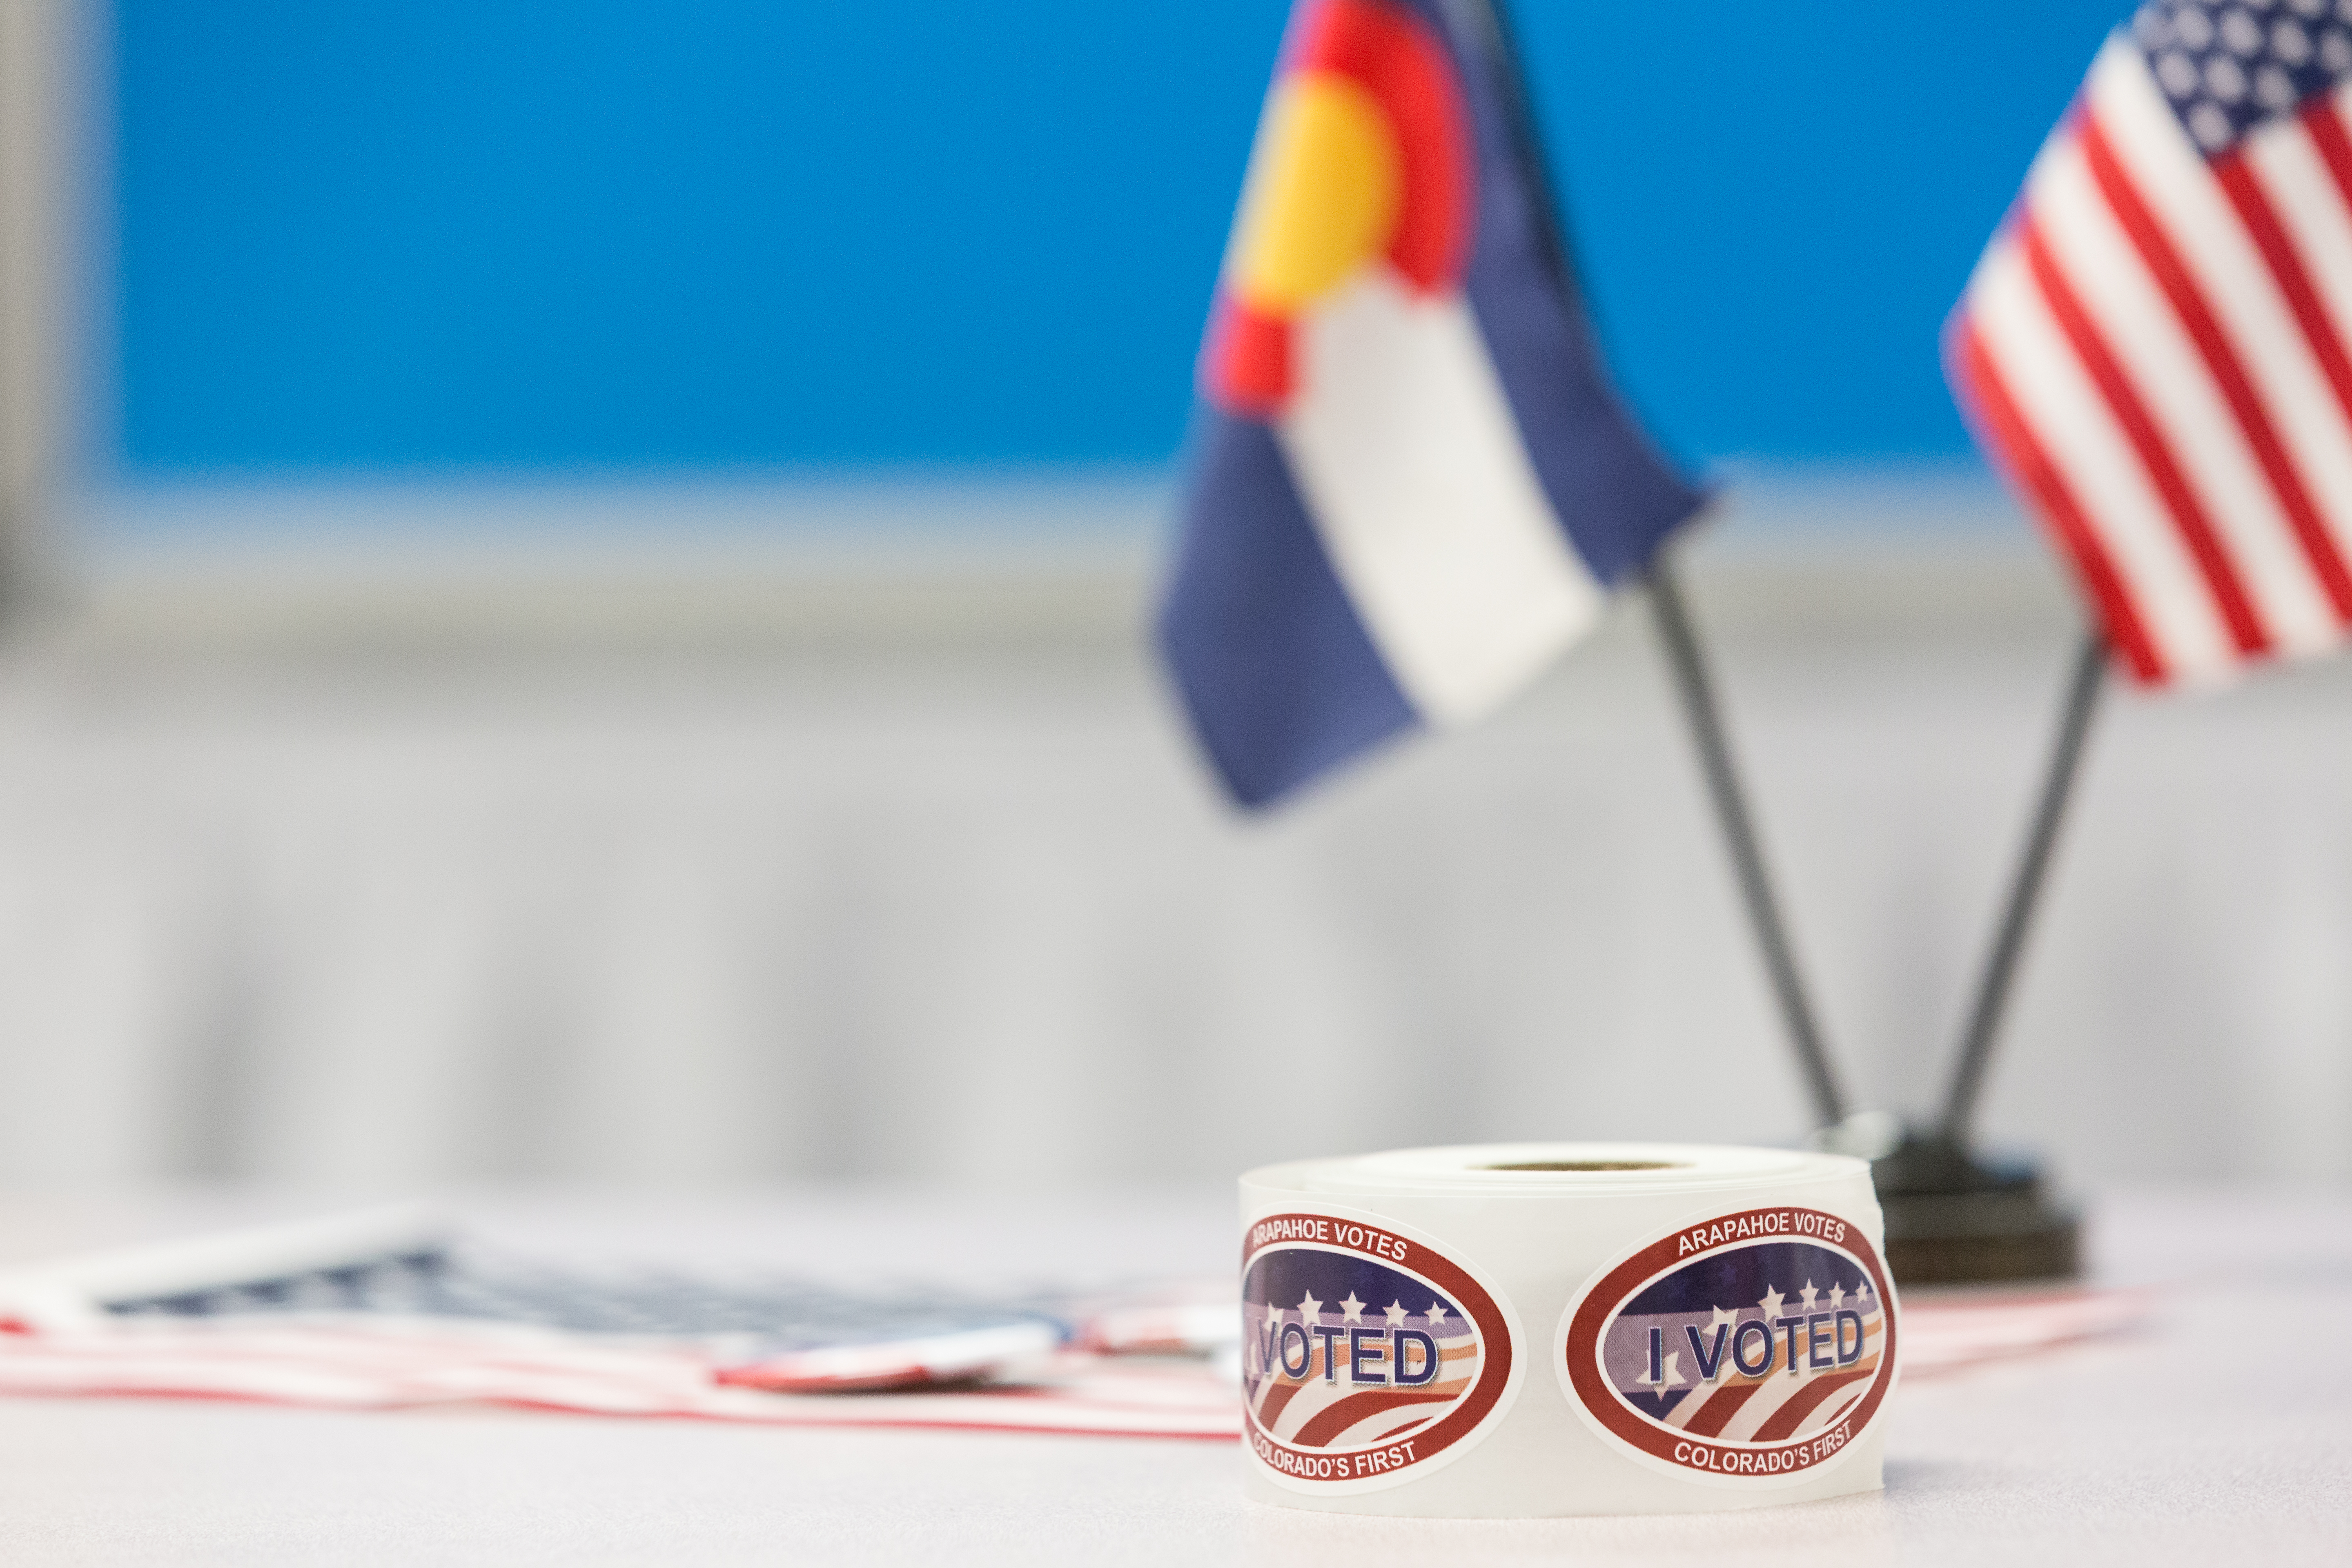 I Voted Stickers on desk with U.S. Flag and Colorado Flag